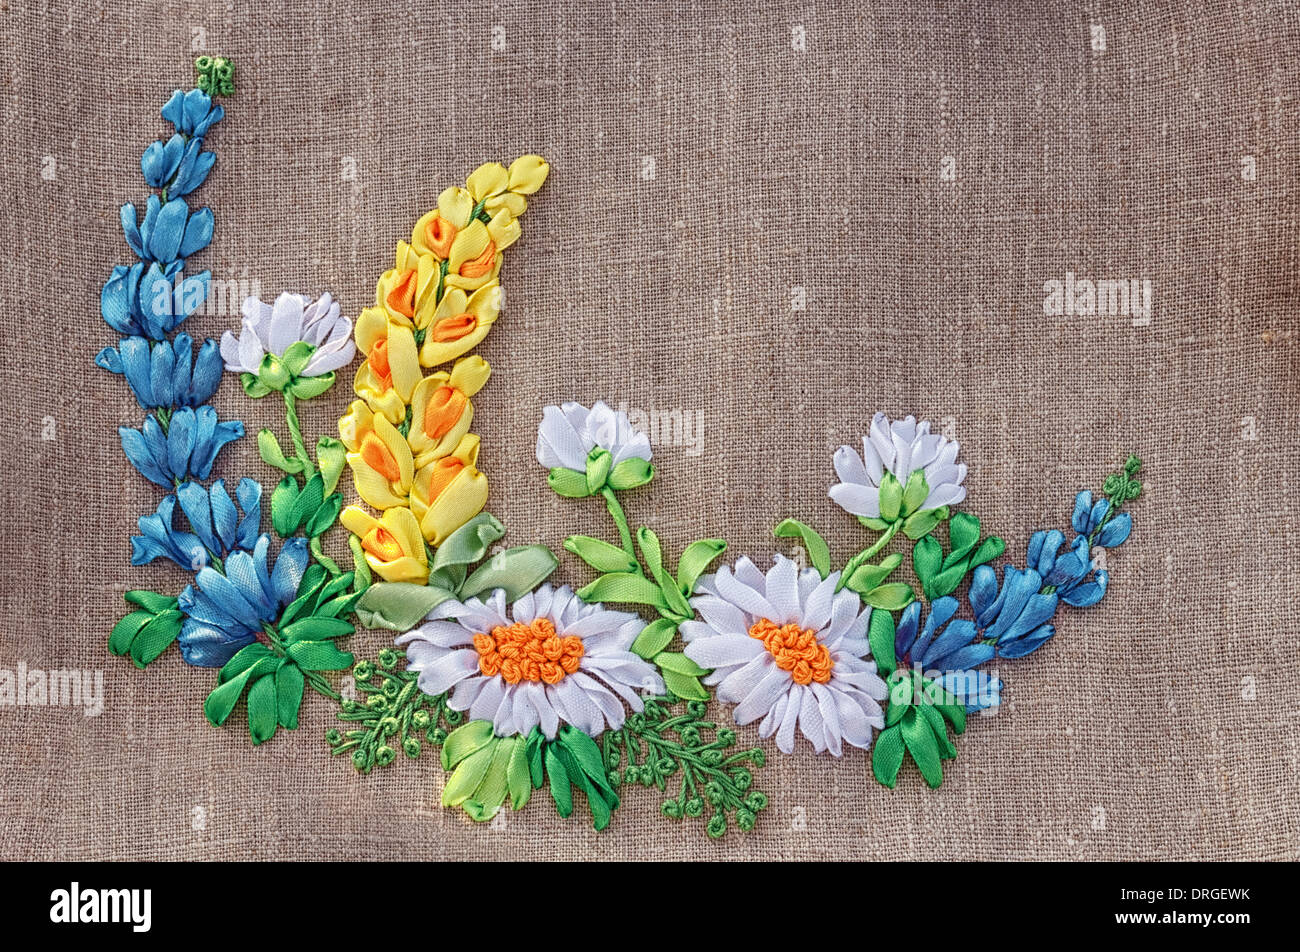 The Belarusian national embroidery tapes on linen fabric. Stock Photo